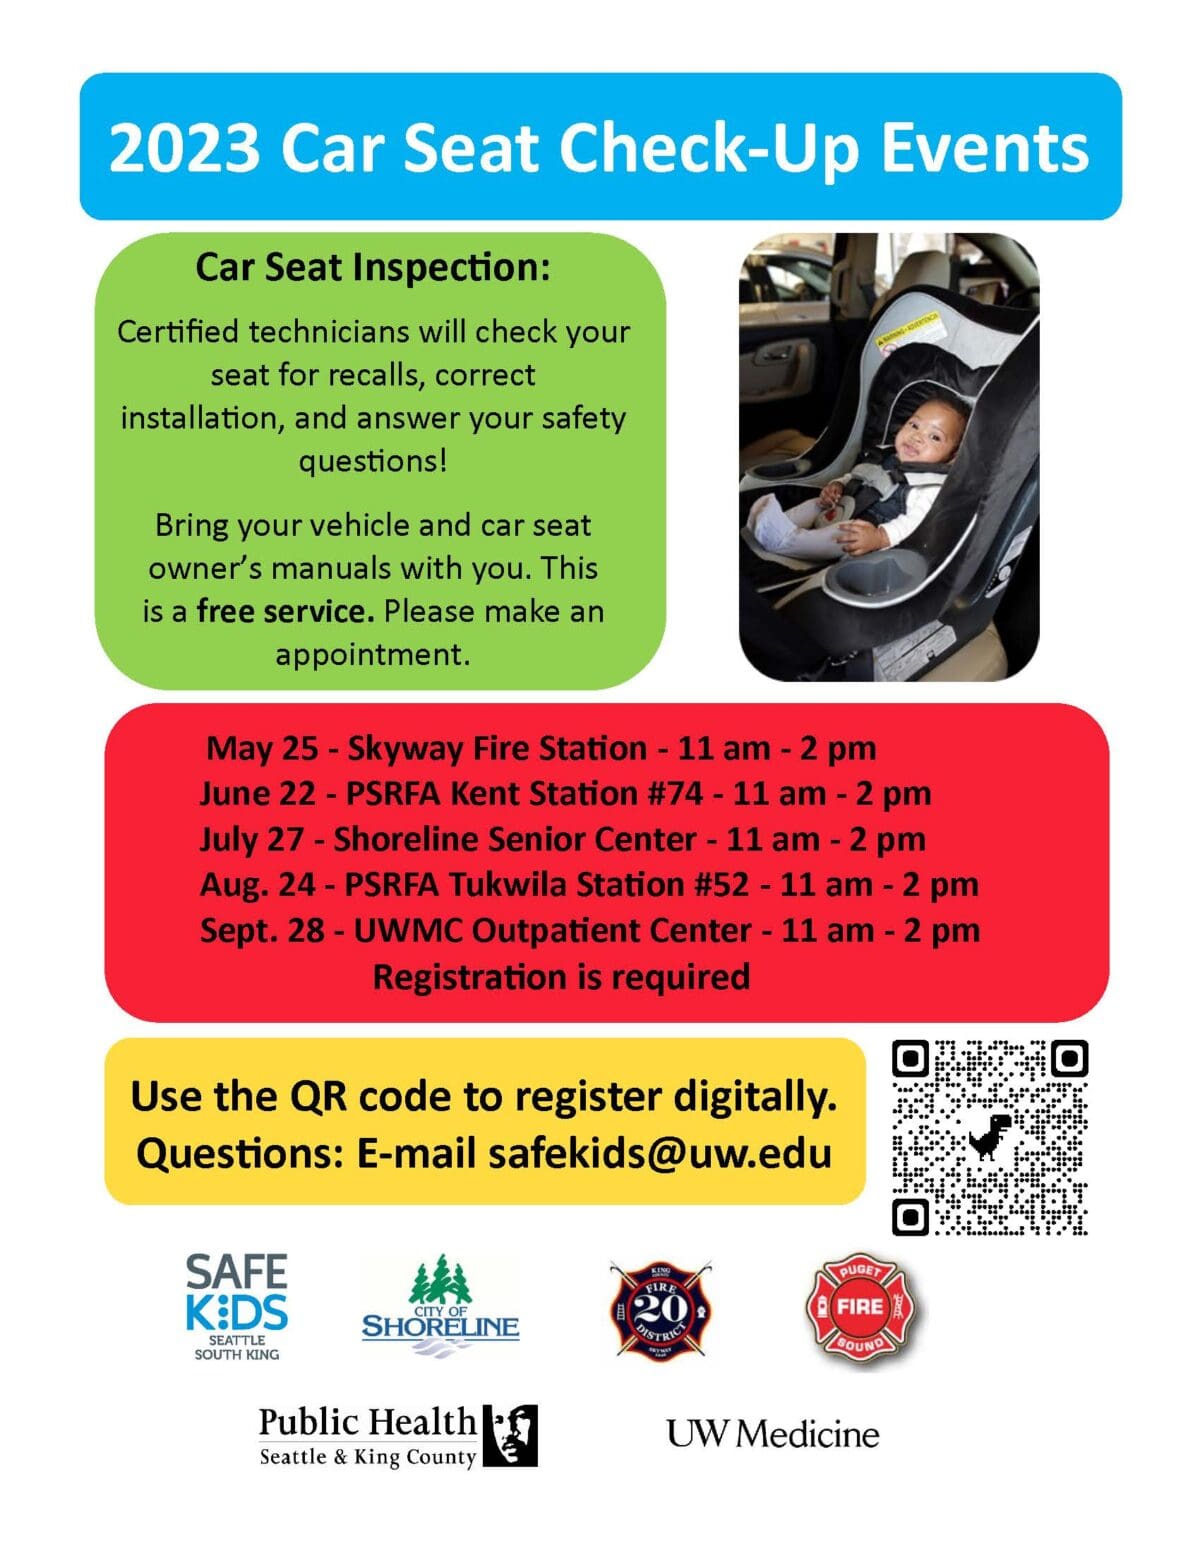 2023 Car Seat Inspection Events (South King County) Harborview Injury